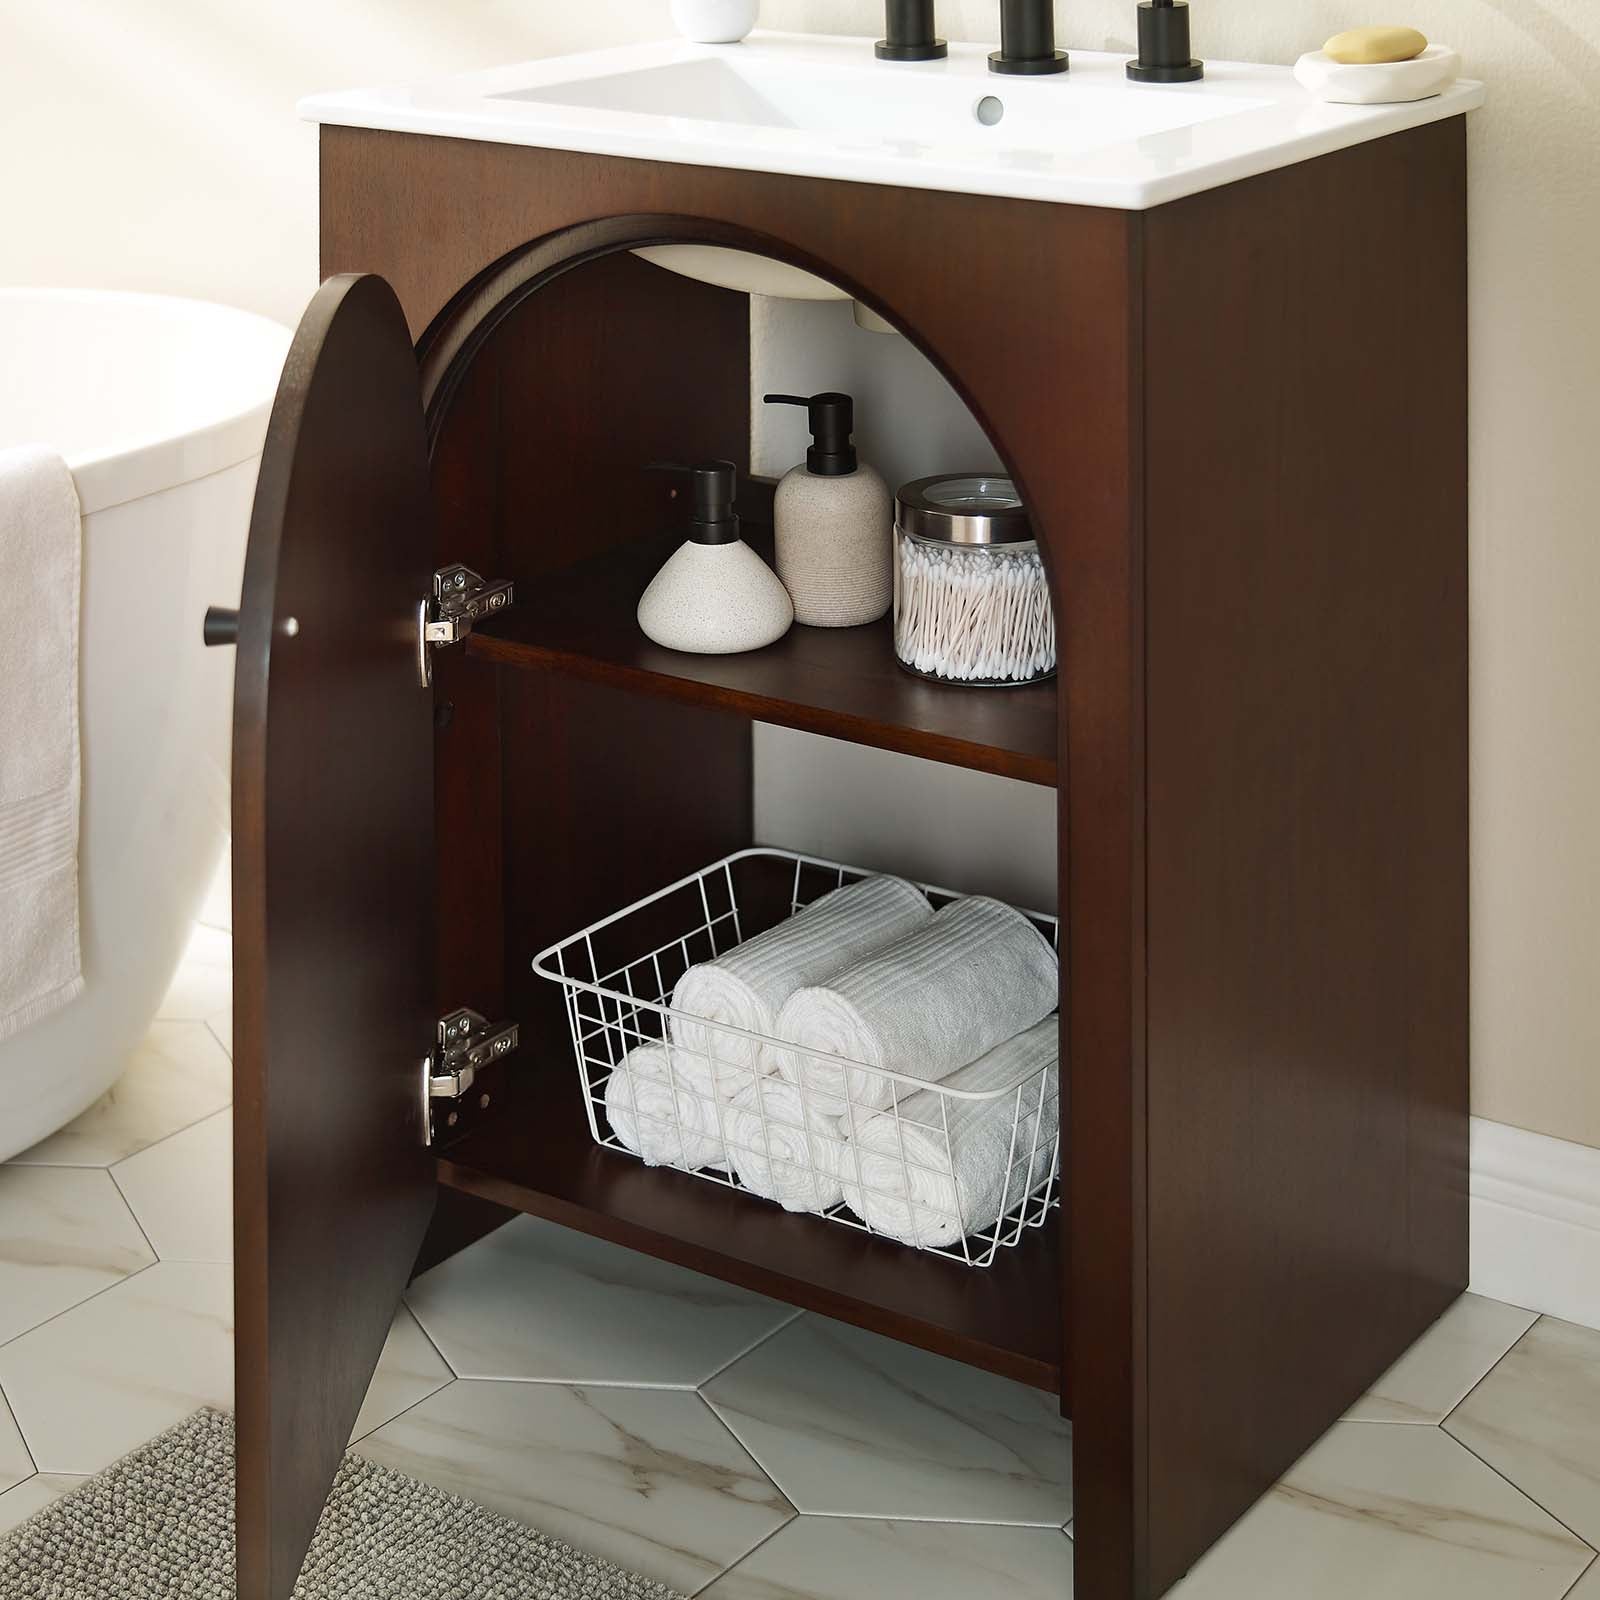 Appia 24" Bathroom Vanity Cabinet (Sink Basin Not Included) - East Shore Modern Home Furnishings